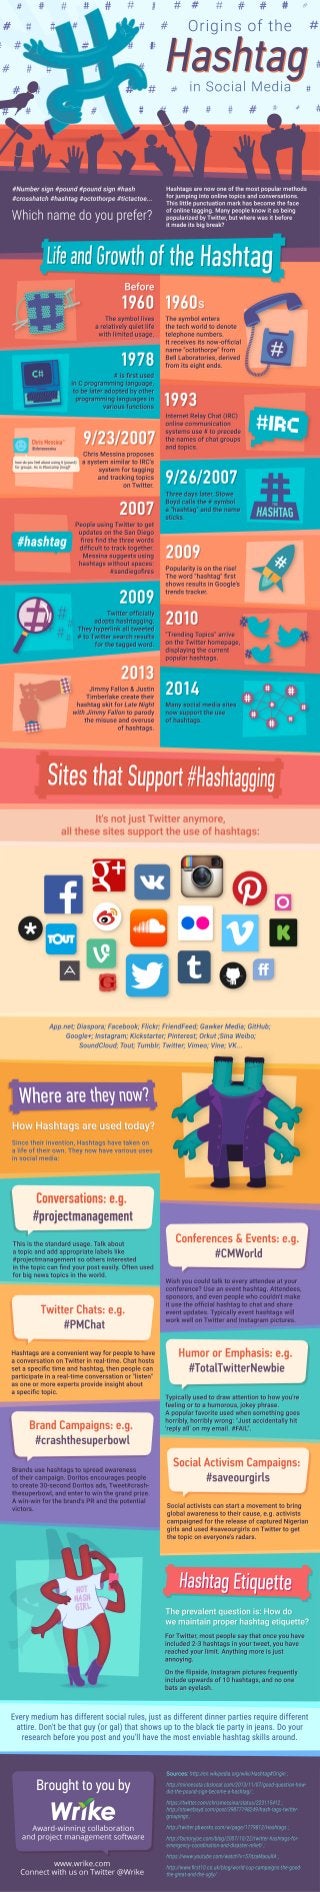 The Origin of the Hashtag in Social Media (Infographic)